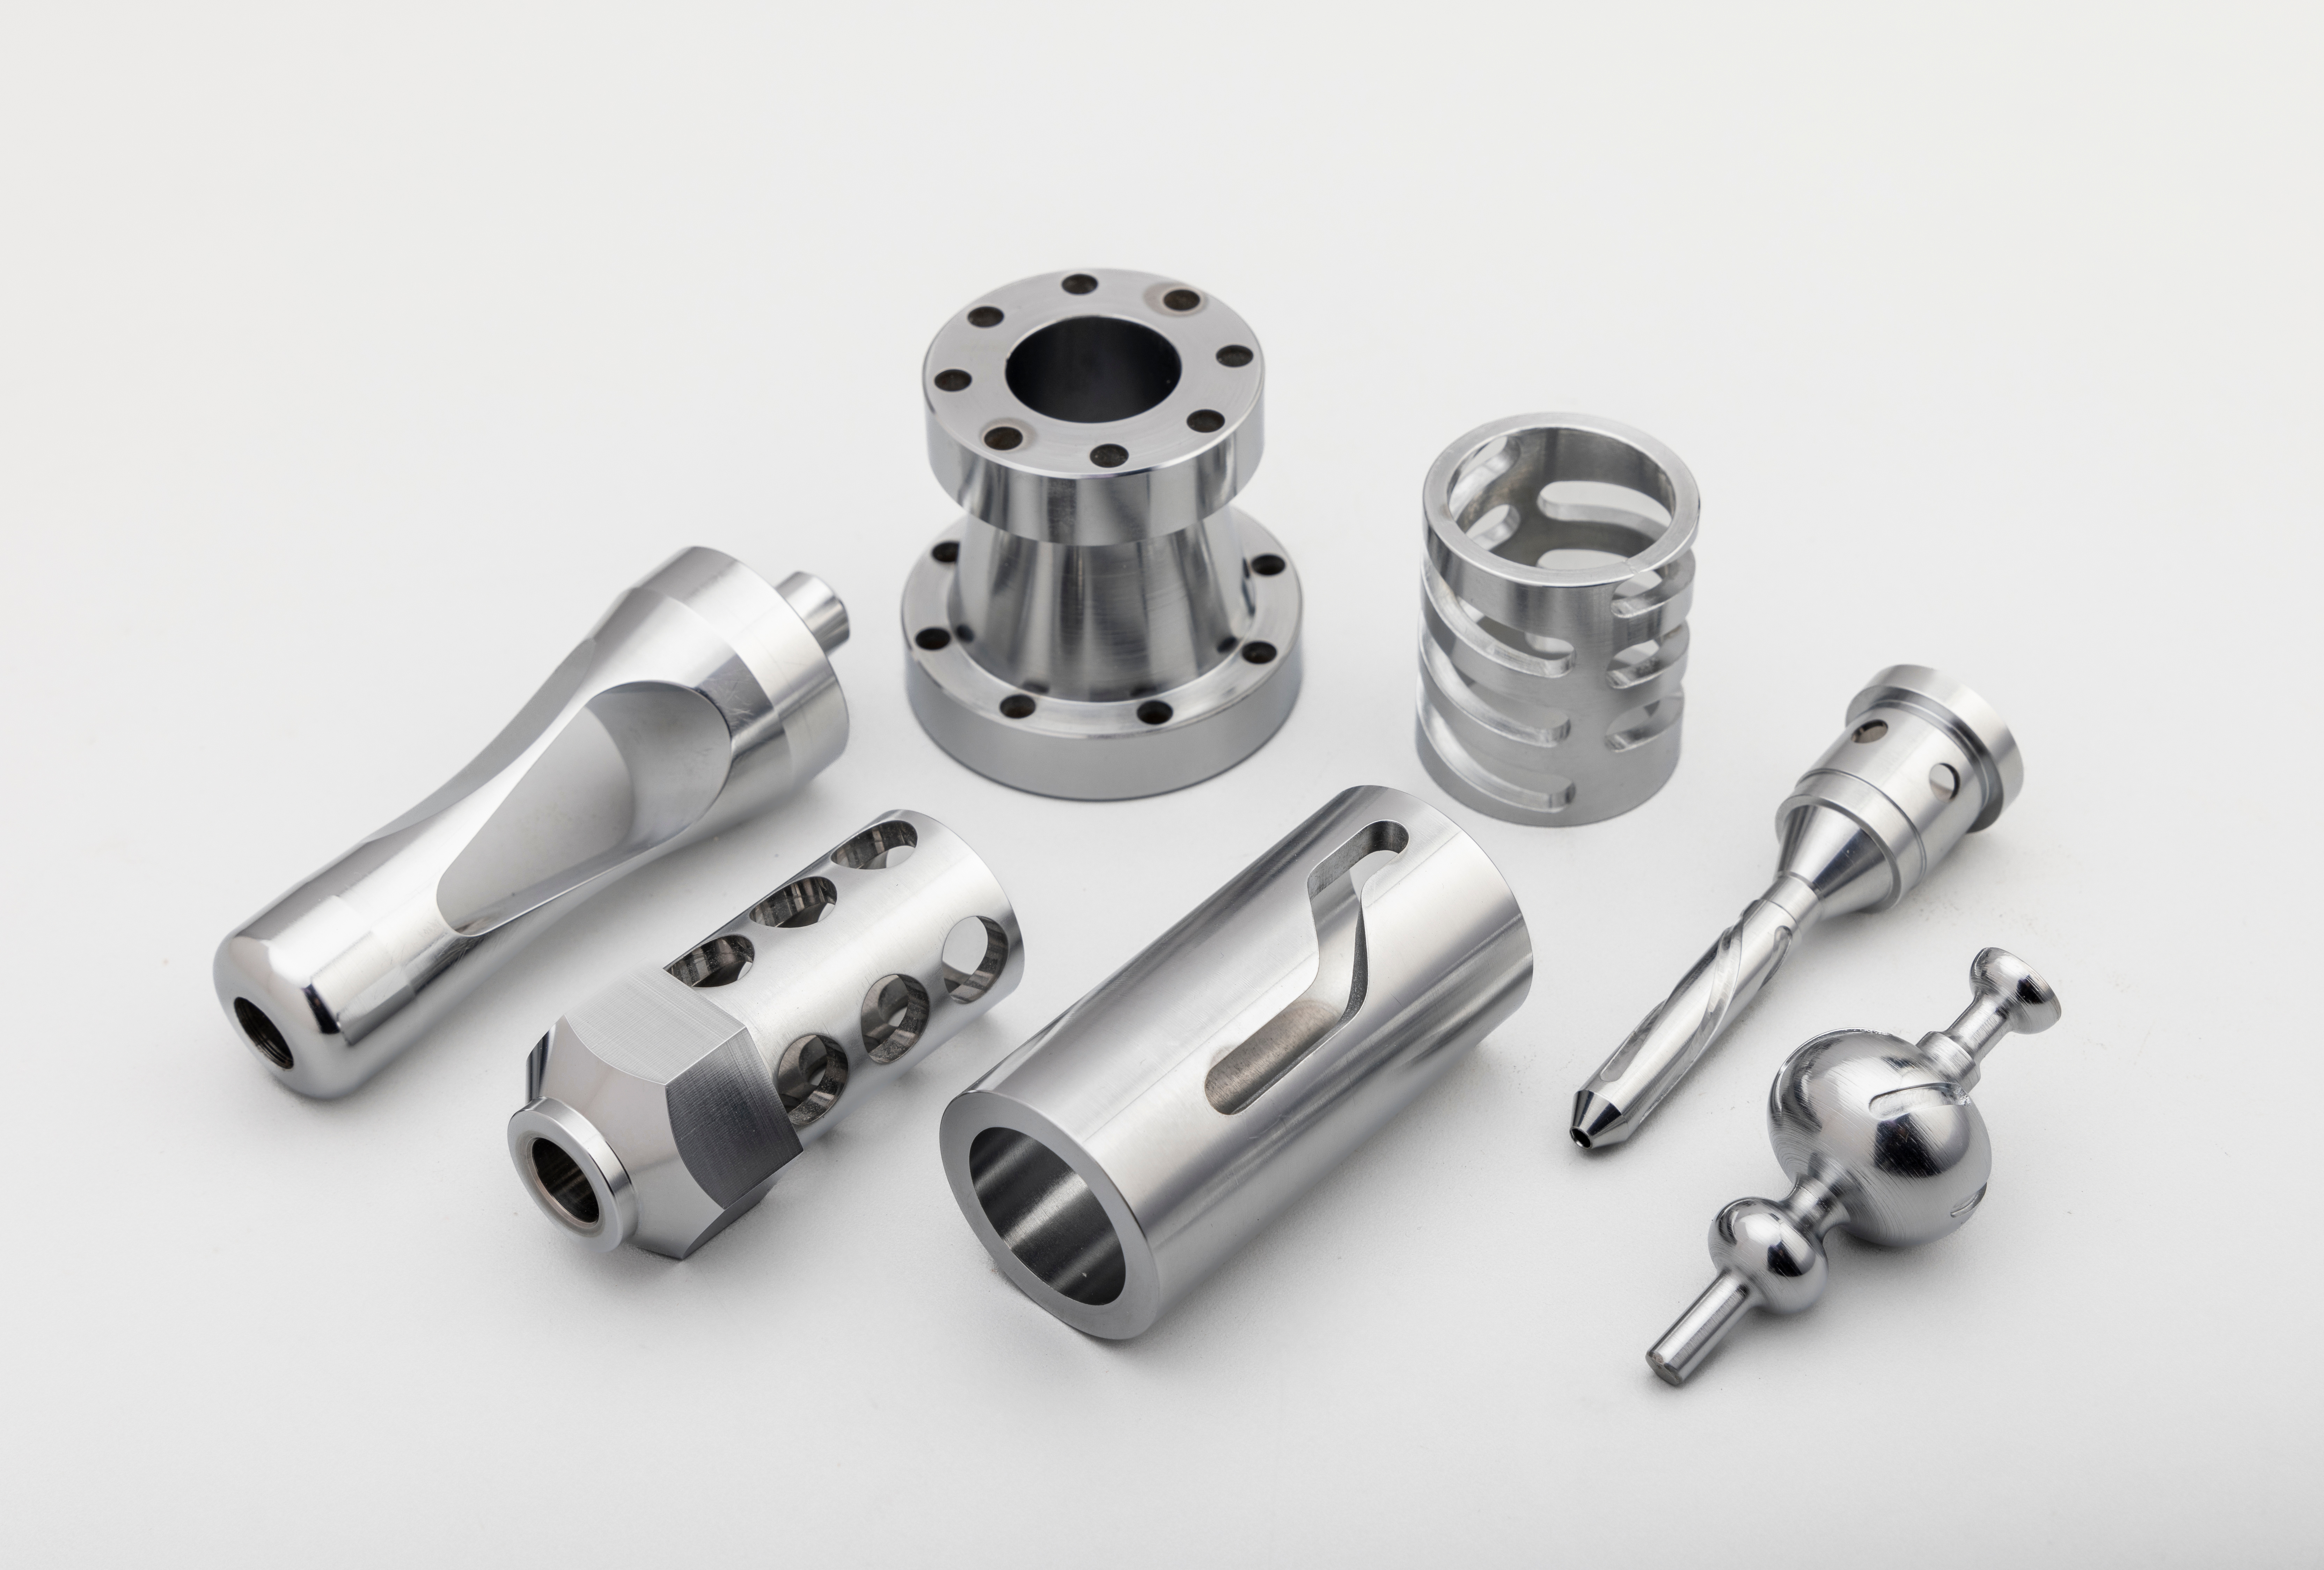 Precision turned metal components